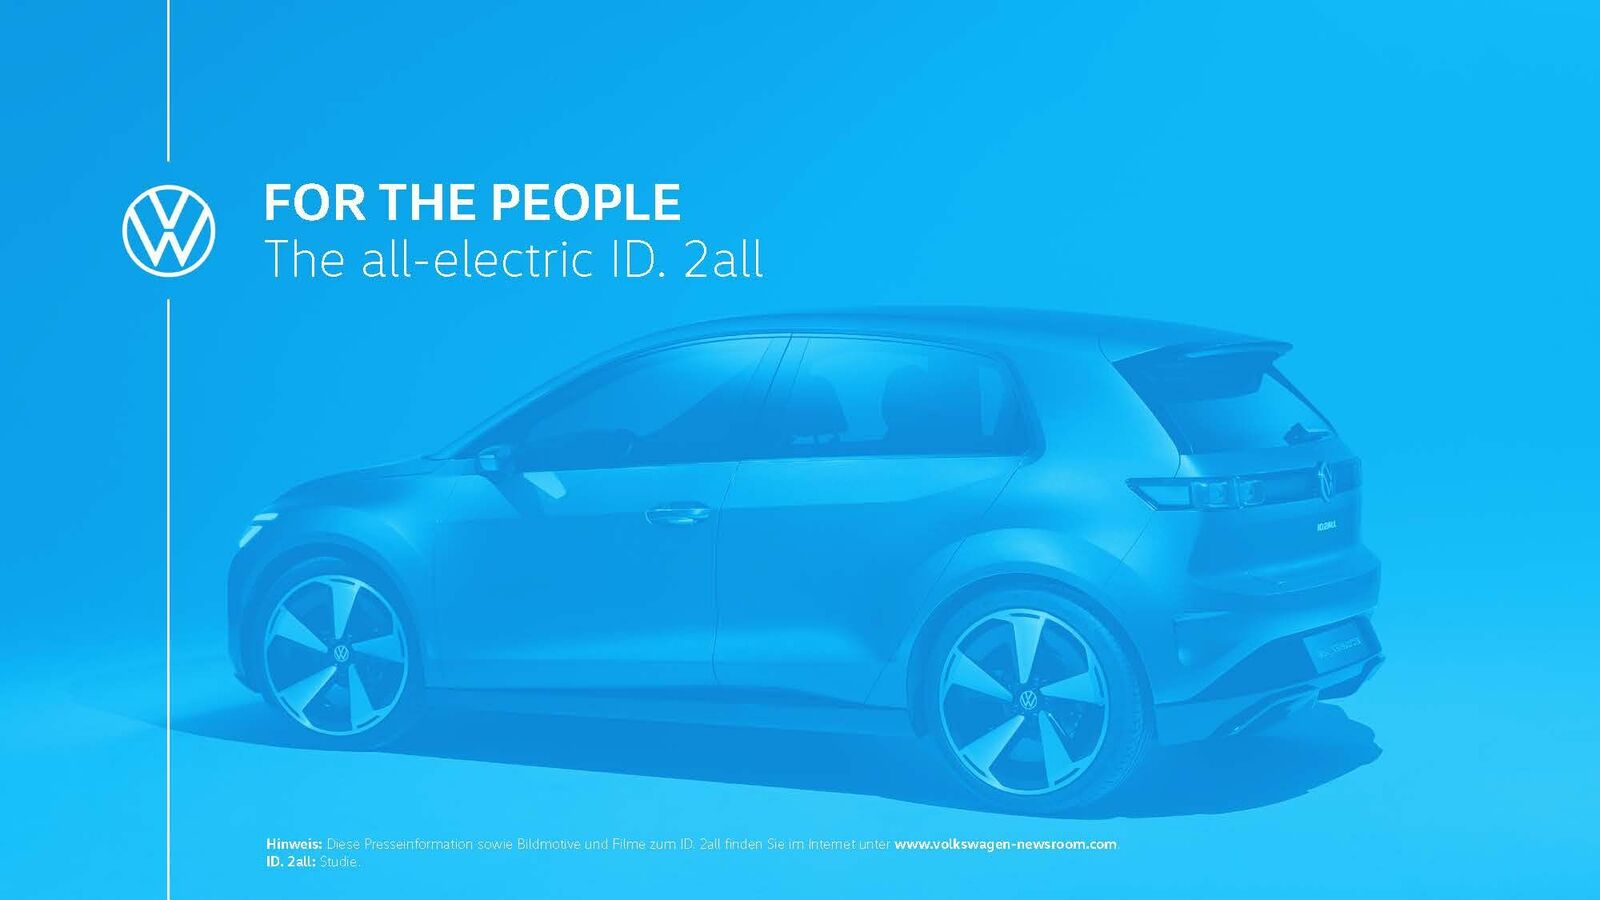 For the People - The all-electric Id 2all